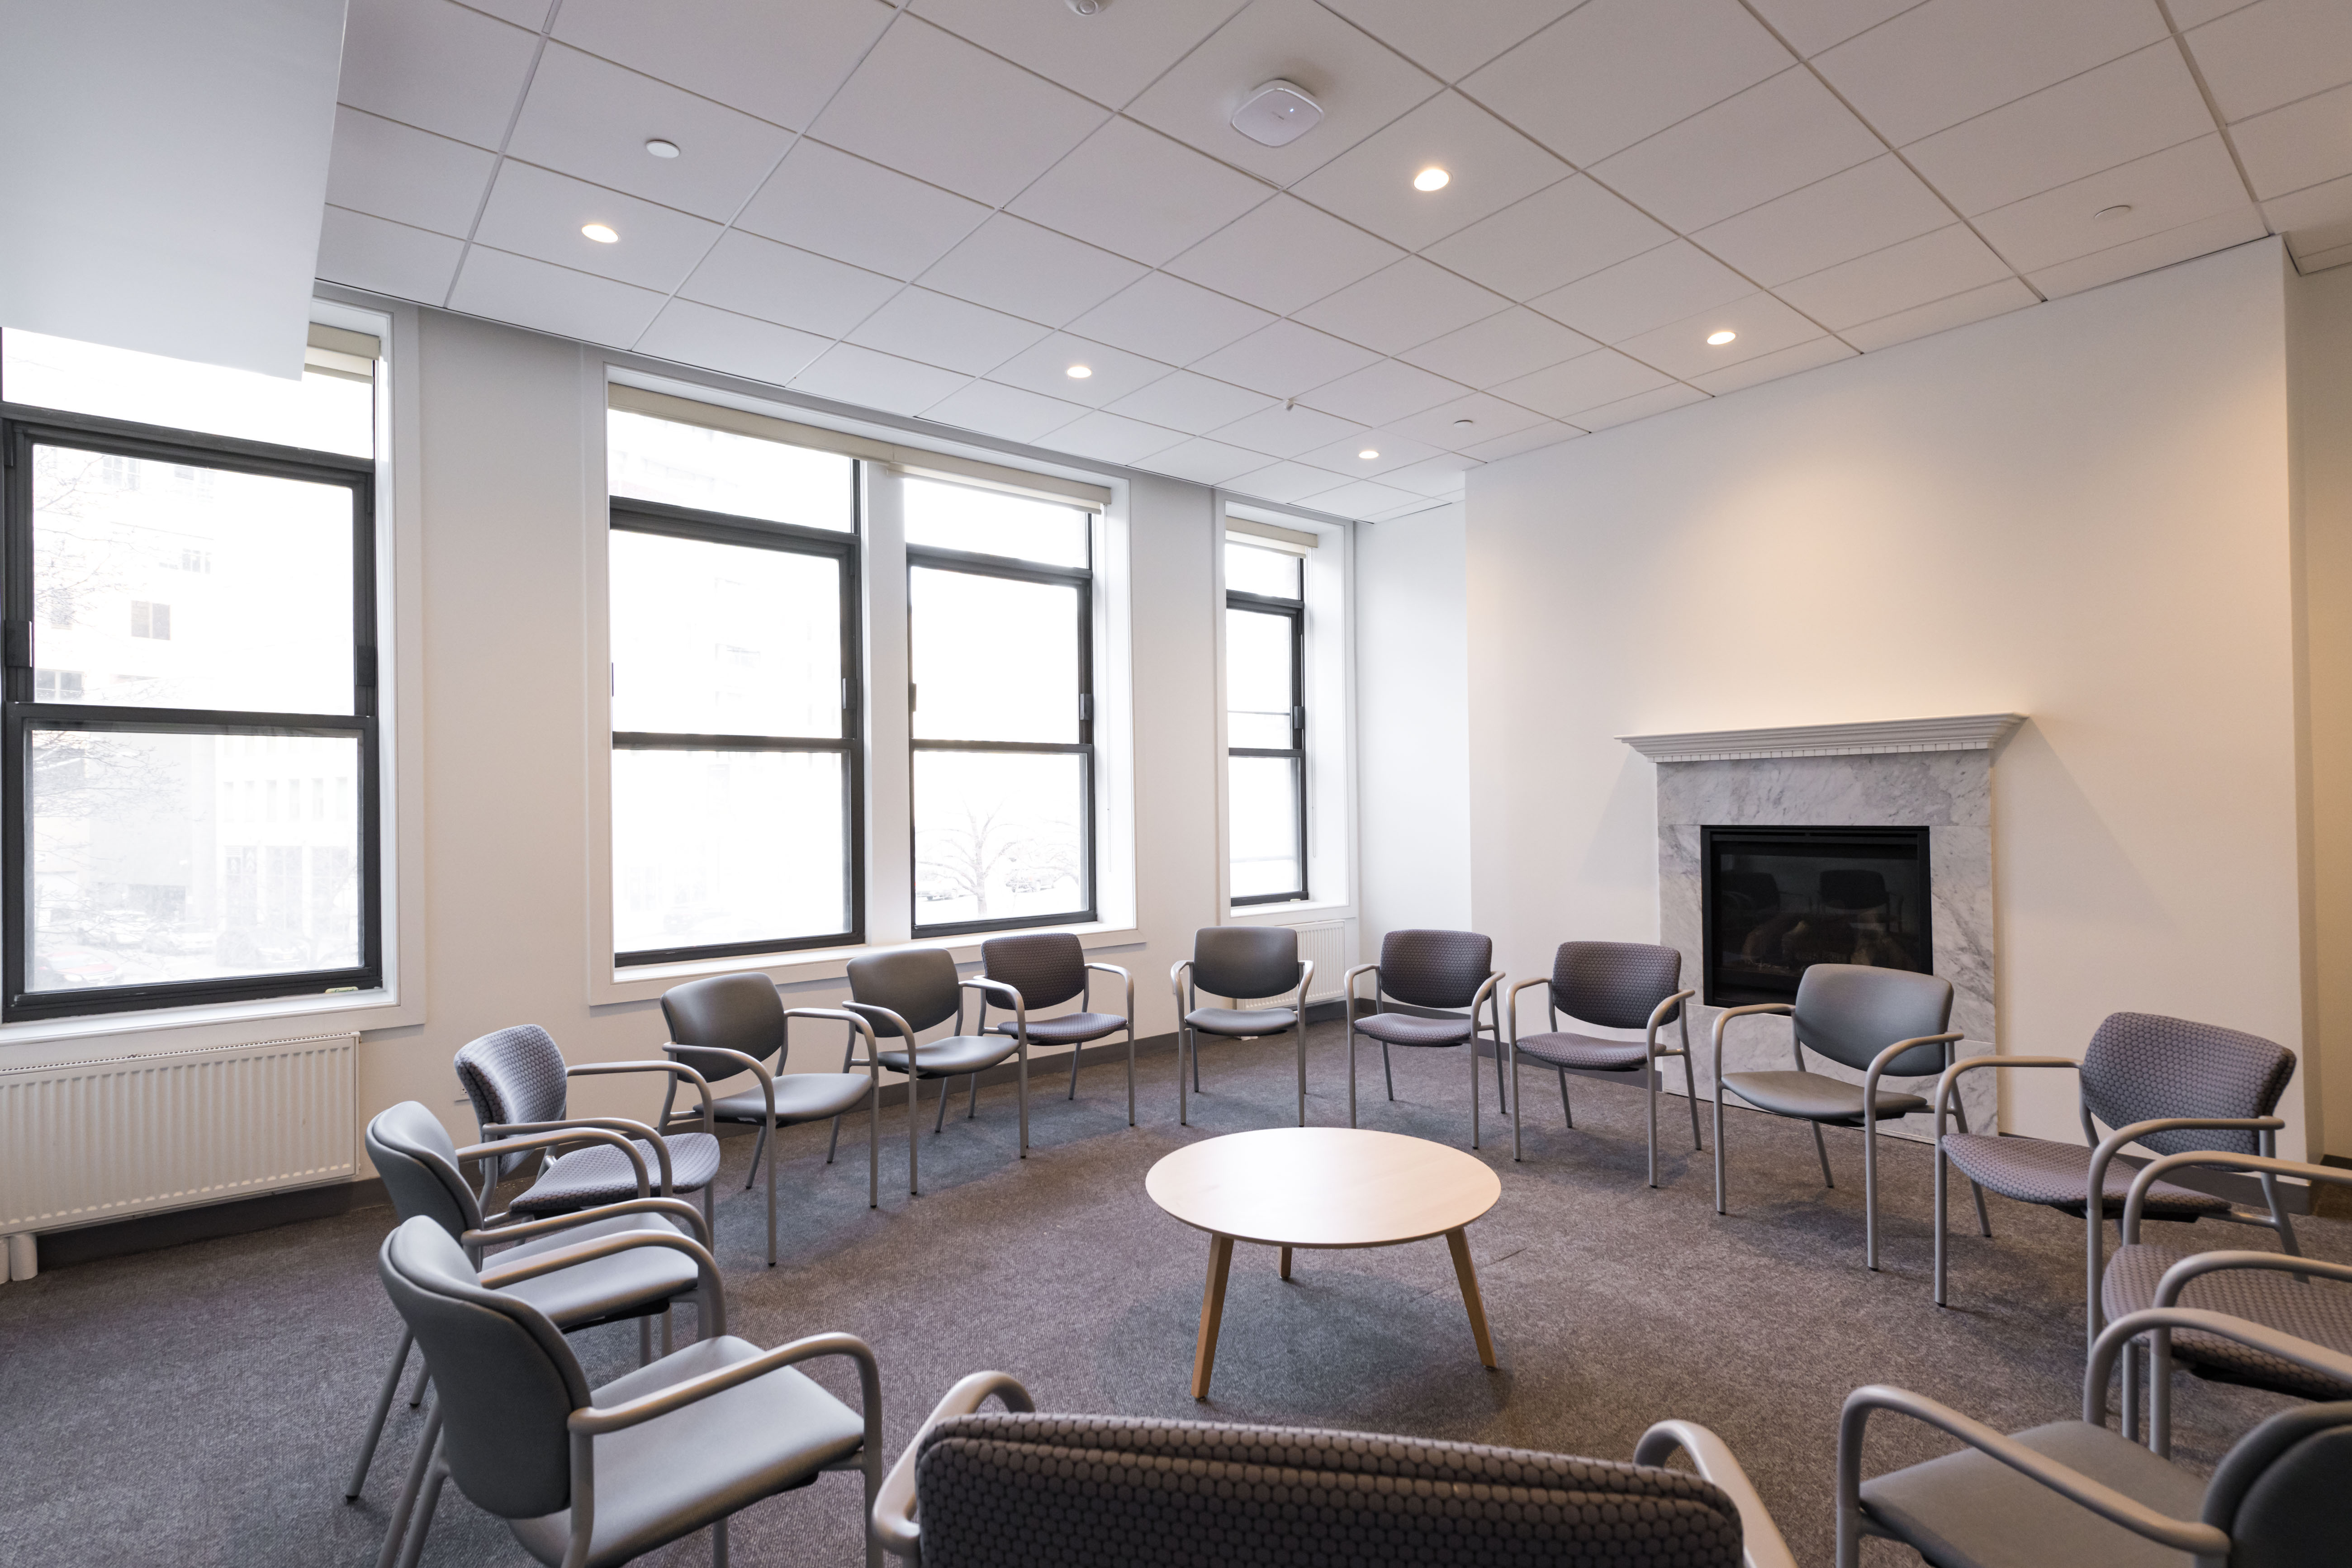 The Tribeca meeting room with bright windows and chairs arranged in a circle